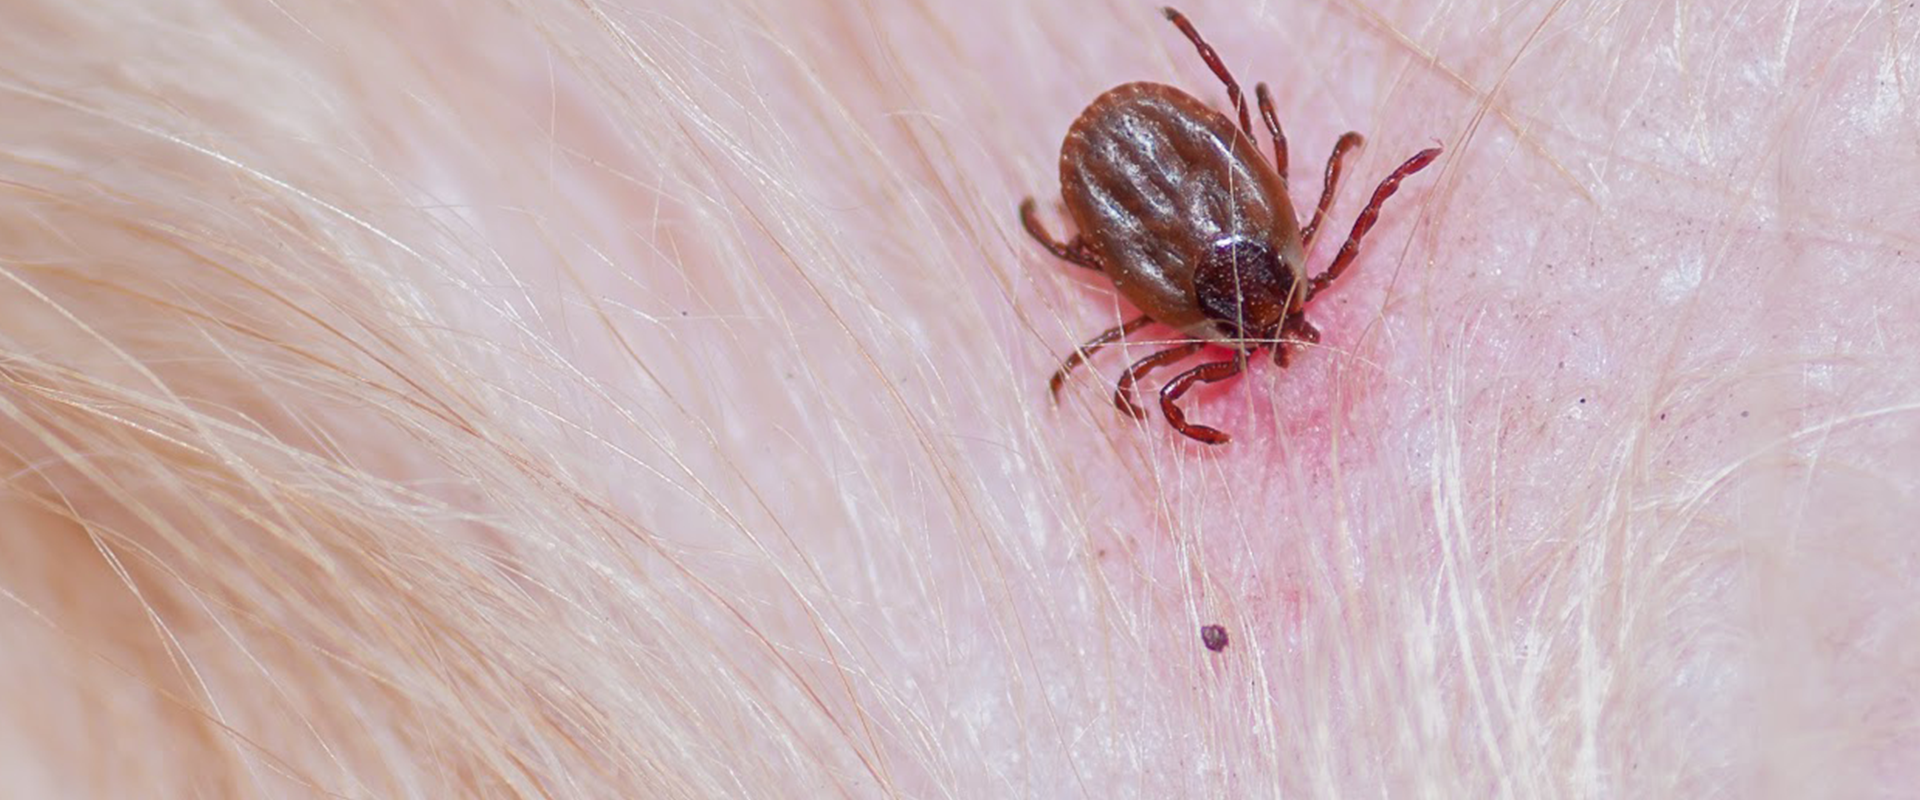 brown tick on a dogs back